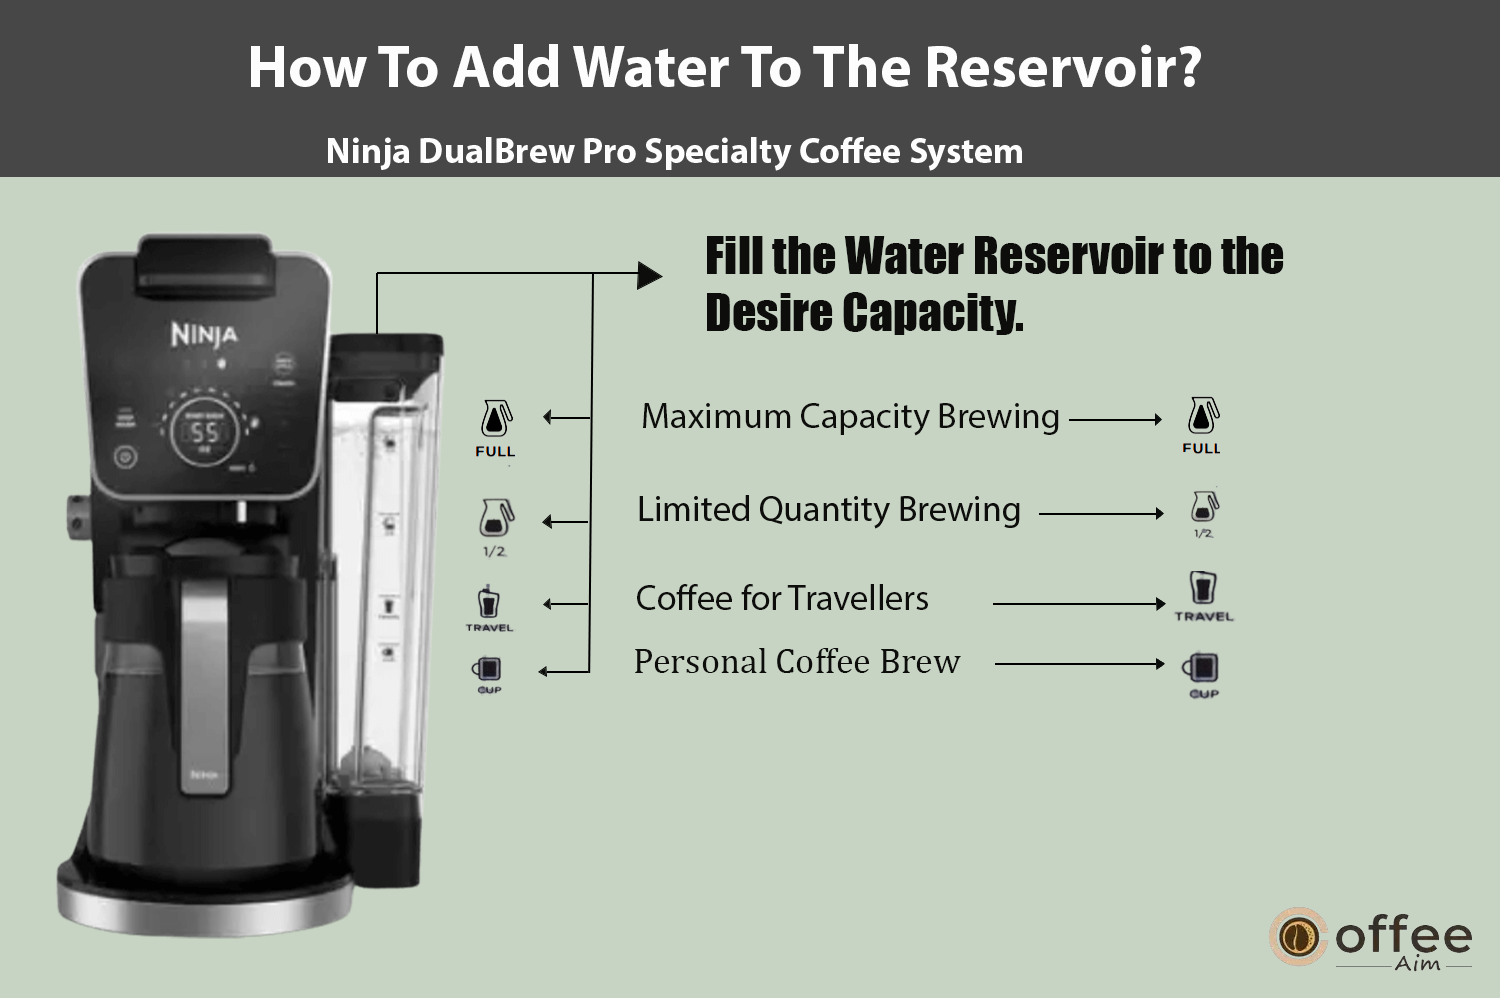 "This image illustrates the optimal water reservoir capacity for the Ninja DualBrew Pro Specialty Coffee System in the article 'How to Use the Ninja DualBrew Pro Specialty Coffee System'."